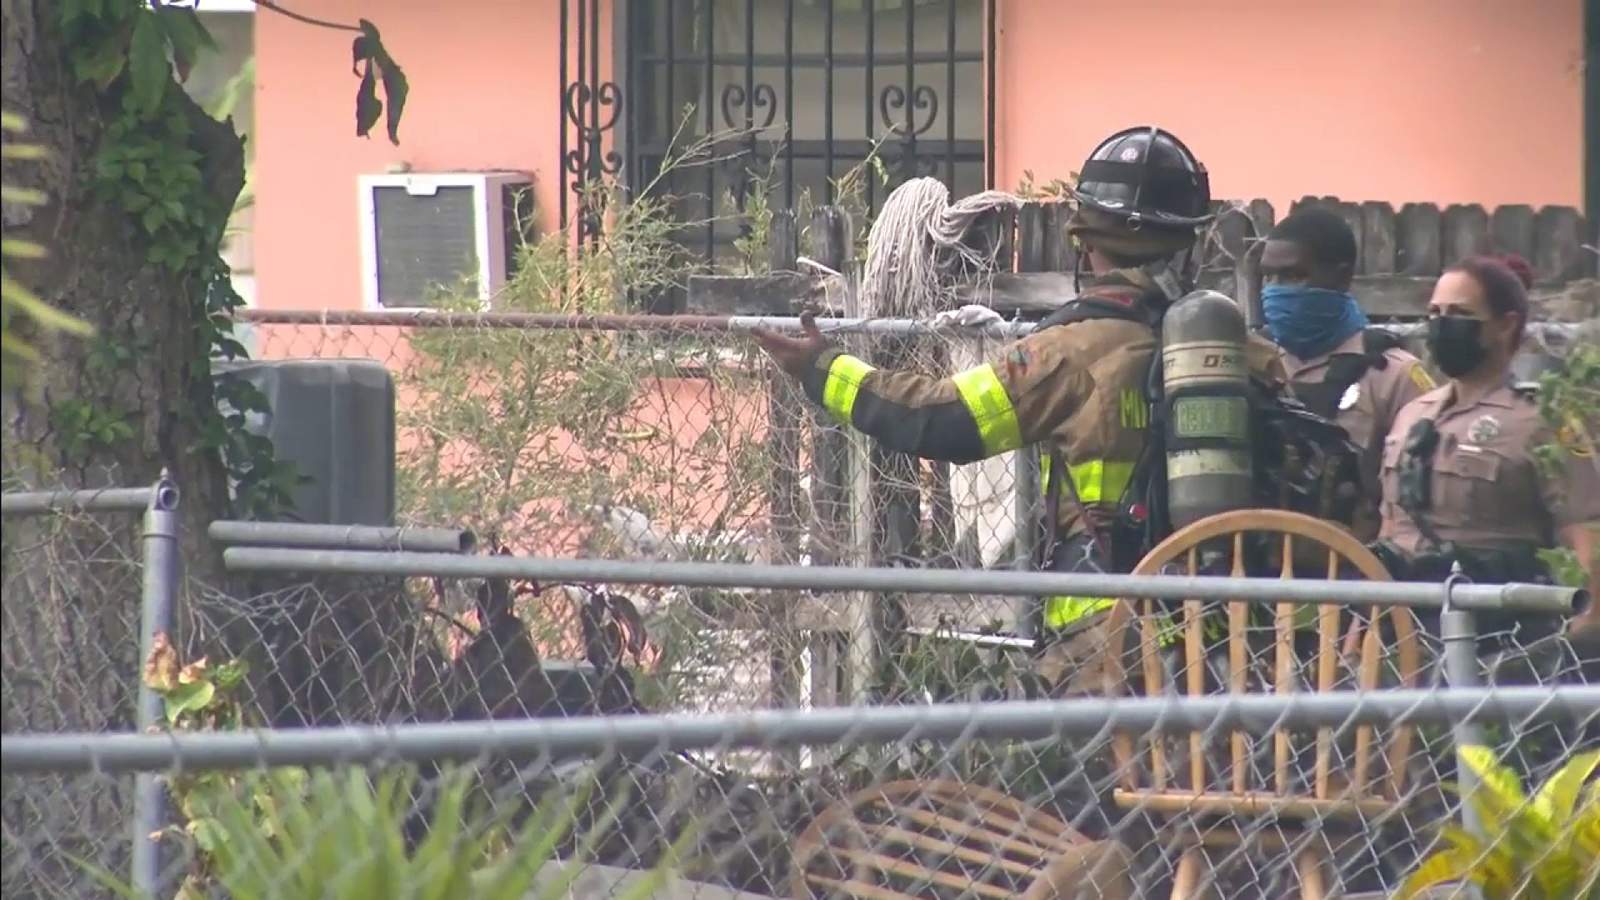 Firefighters find 1 dead during trailer fire in Miami-Dade